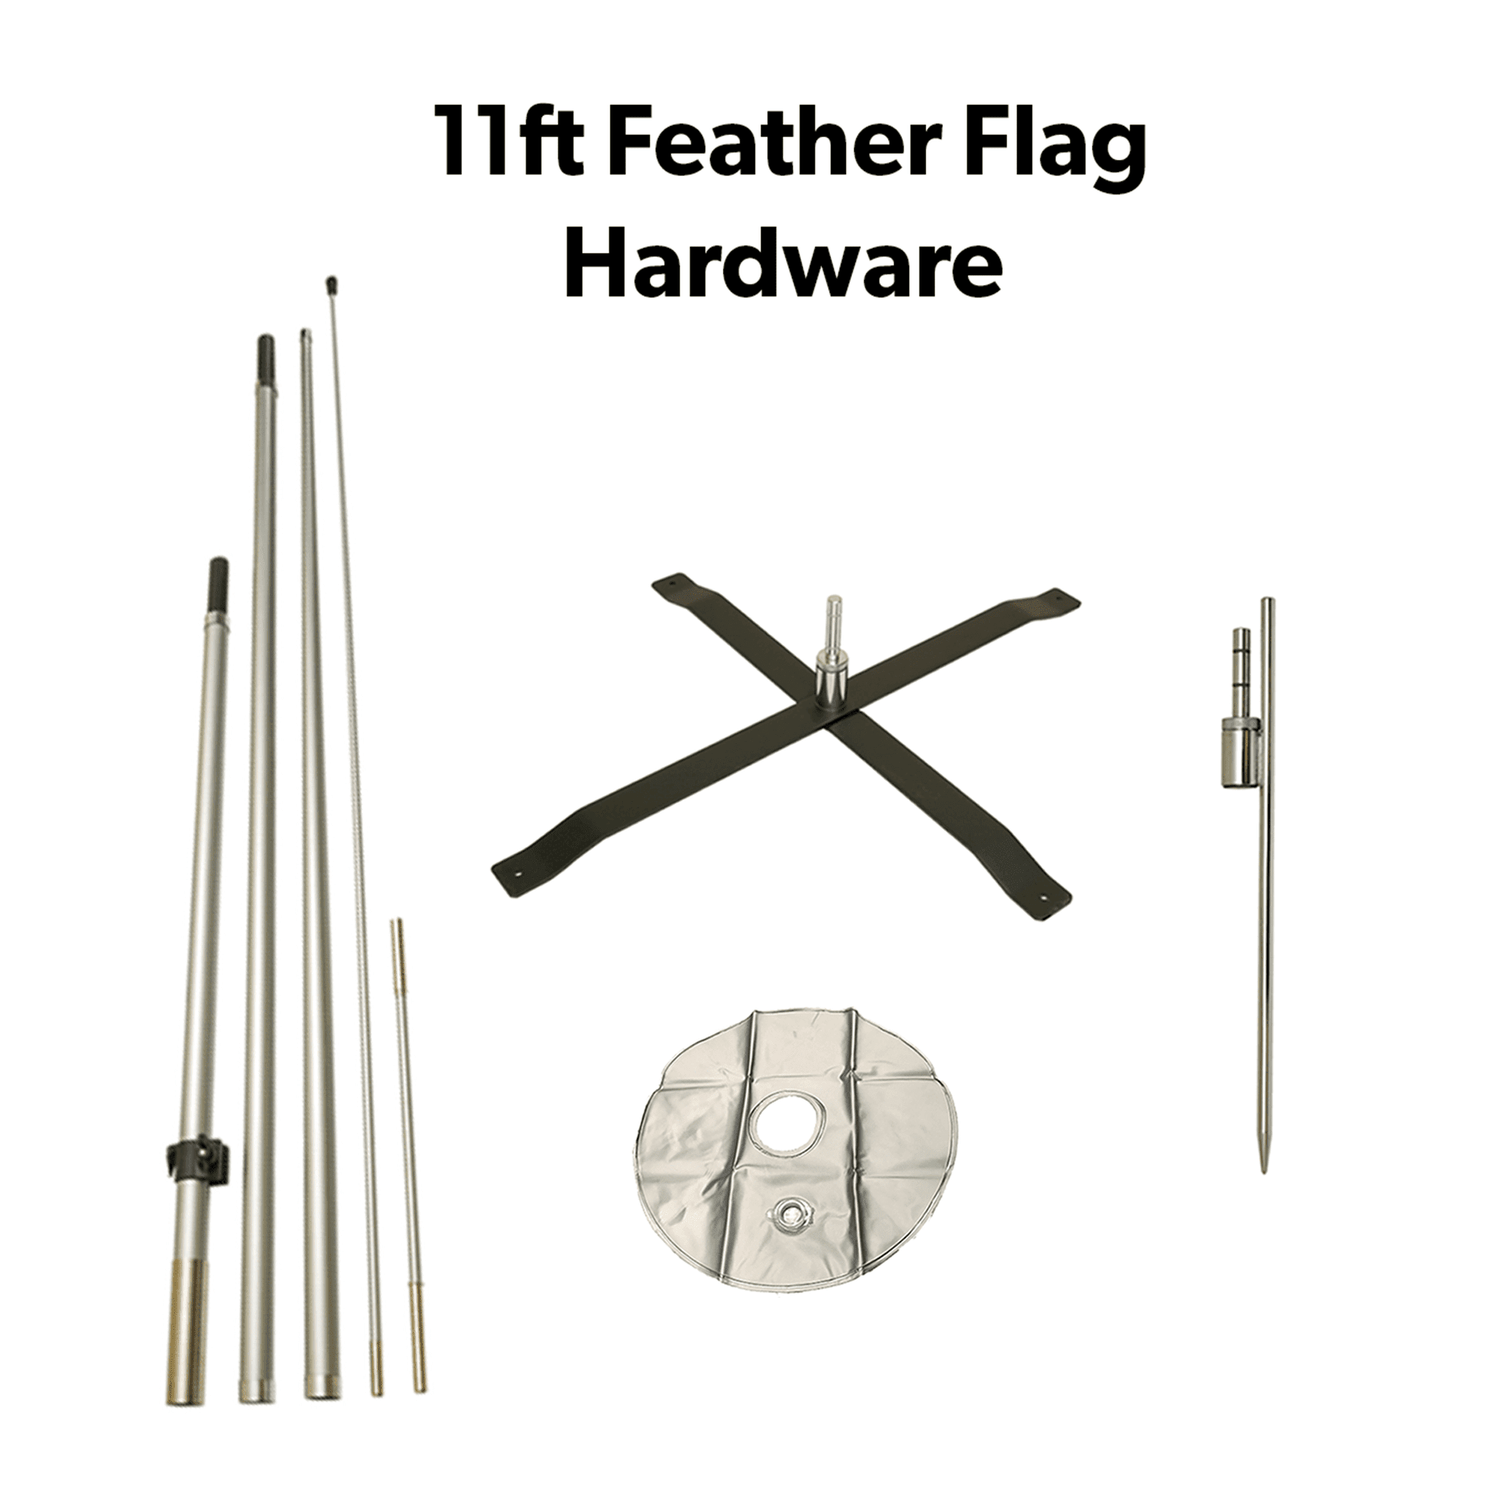 11ft Feather Flag Hardware 